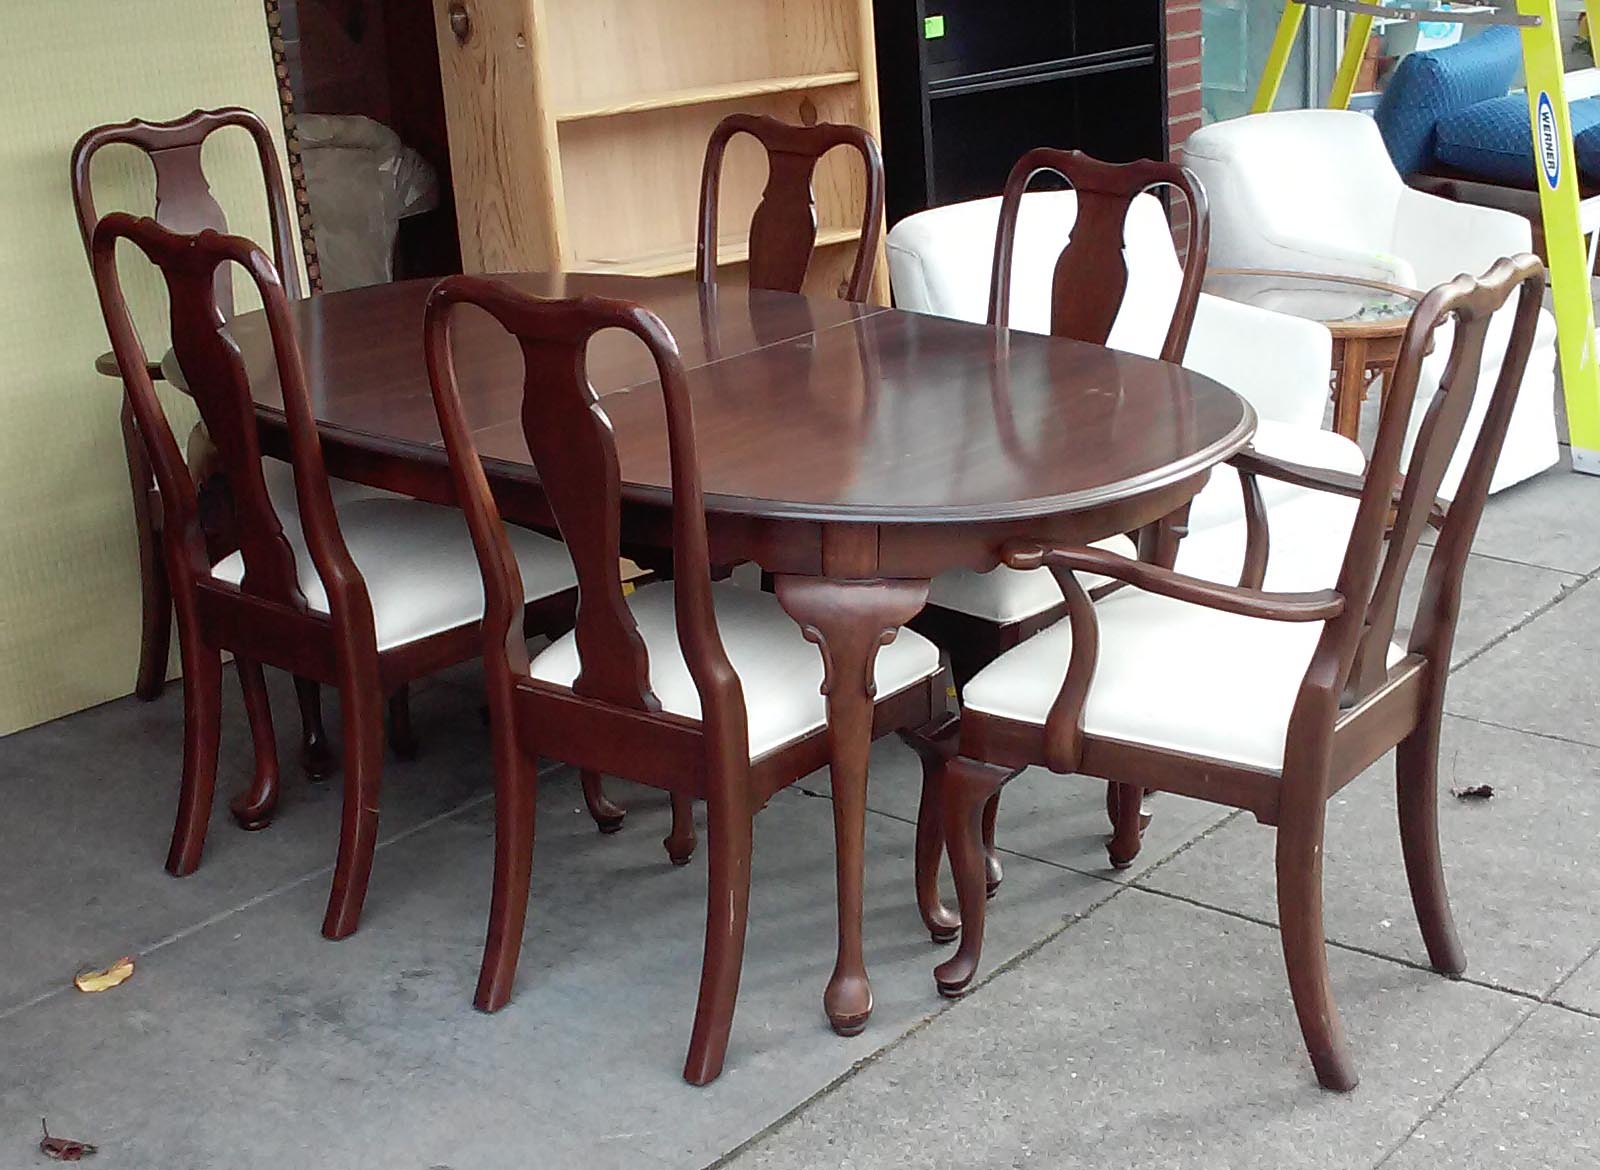 UHURU FURNITURE & COLLECTIBLES: SOLD Ethan Allen Dining Set: 6 Chairs